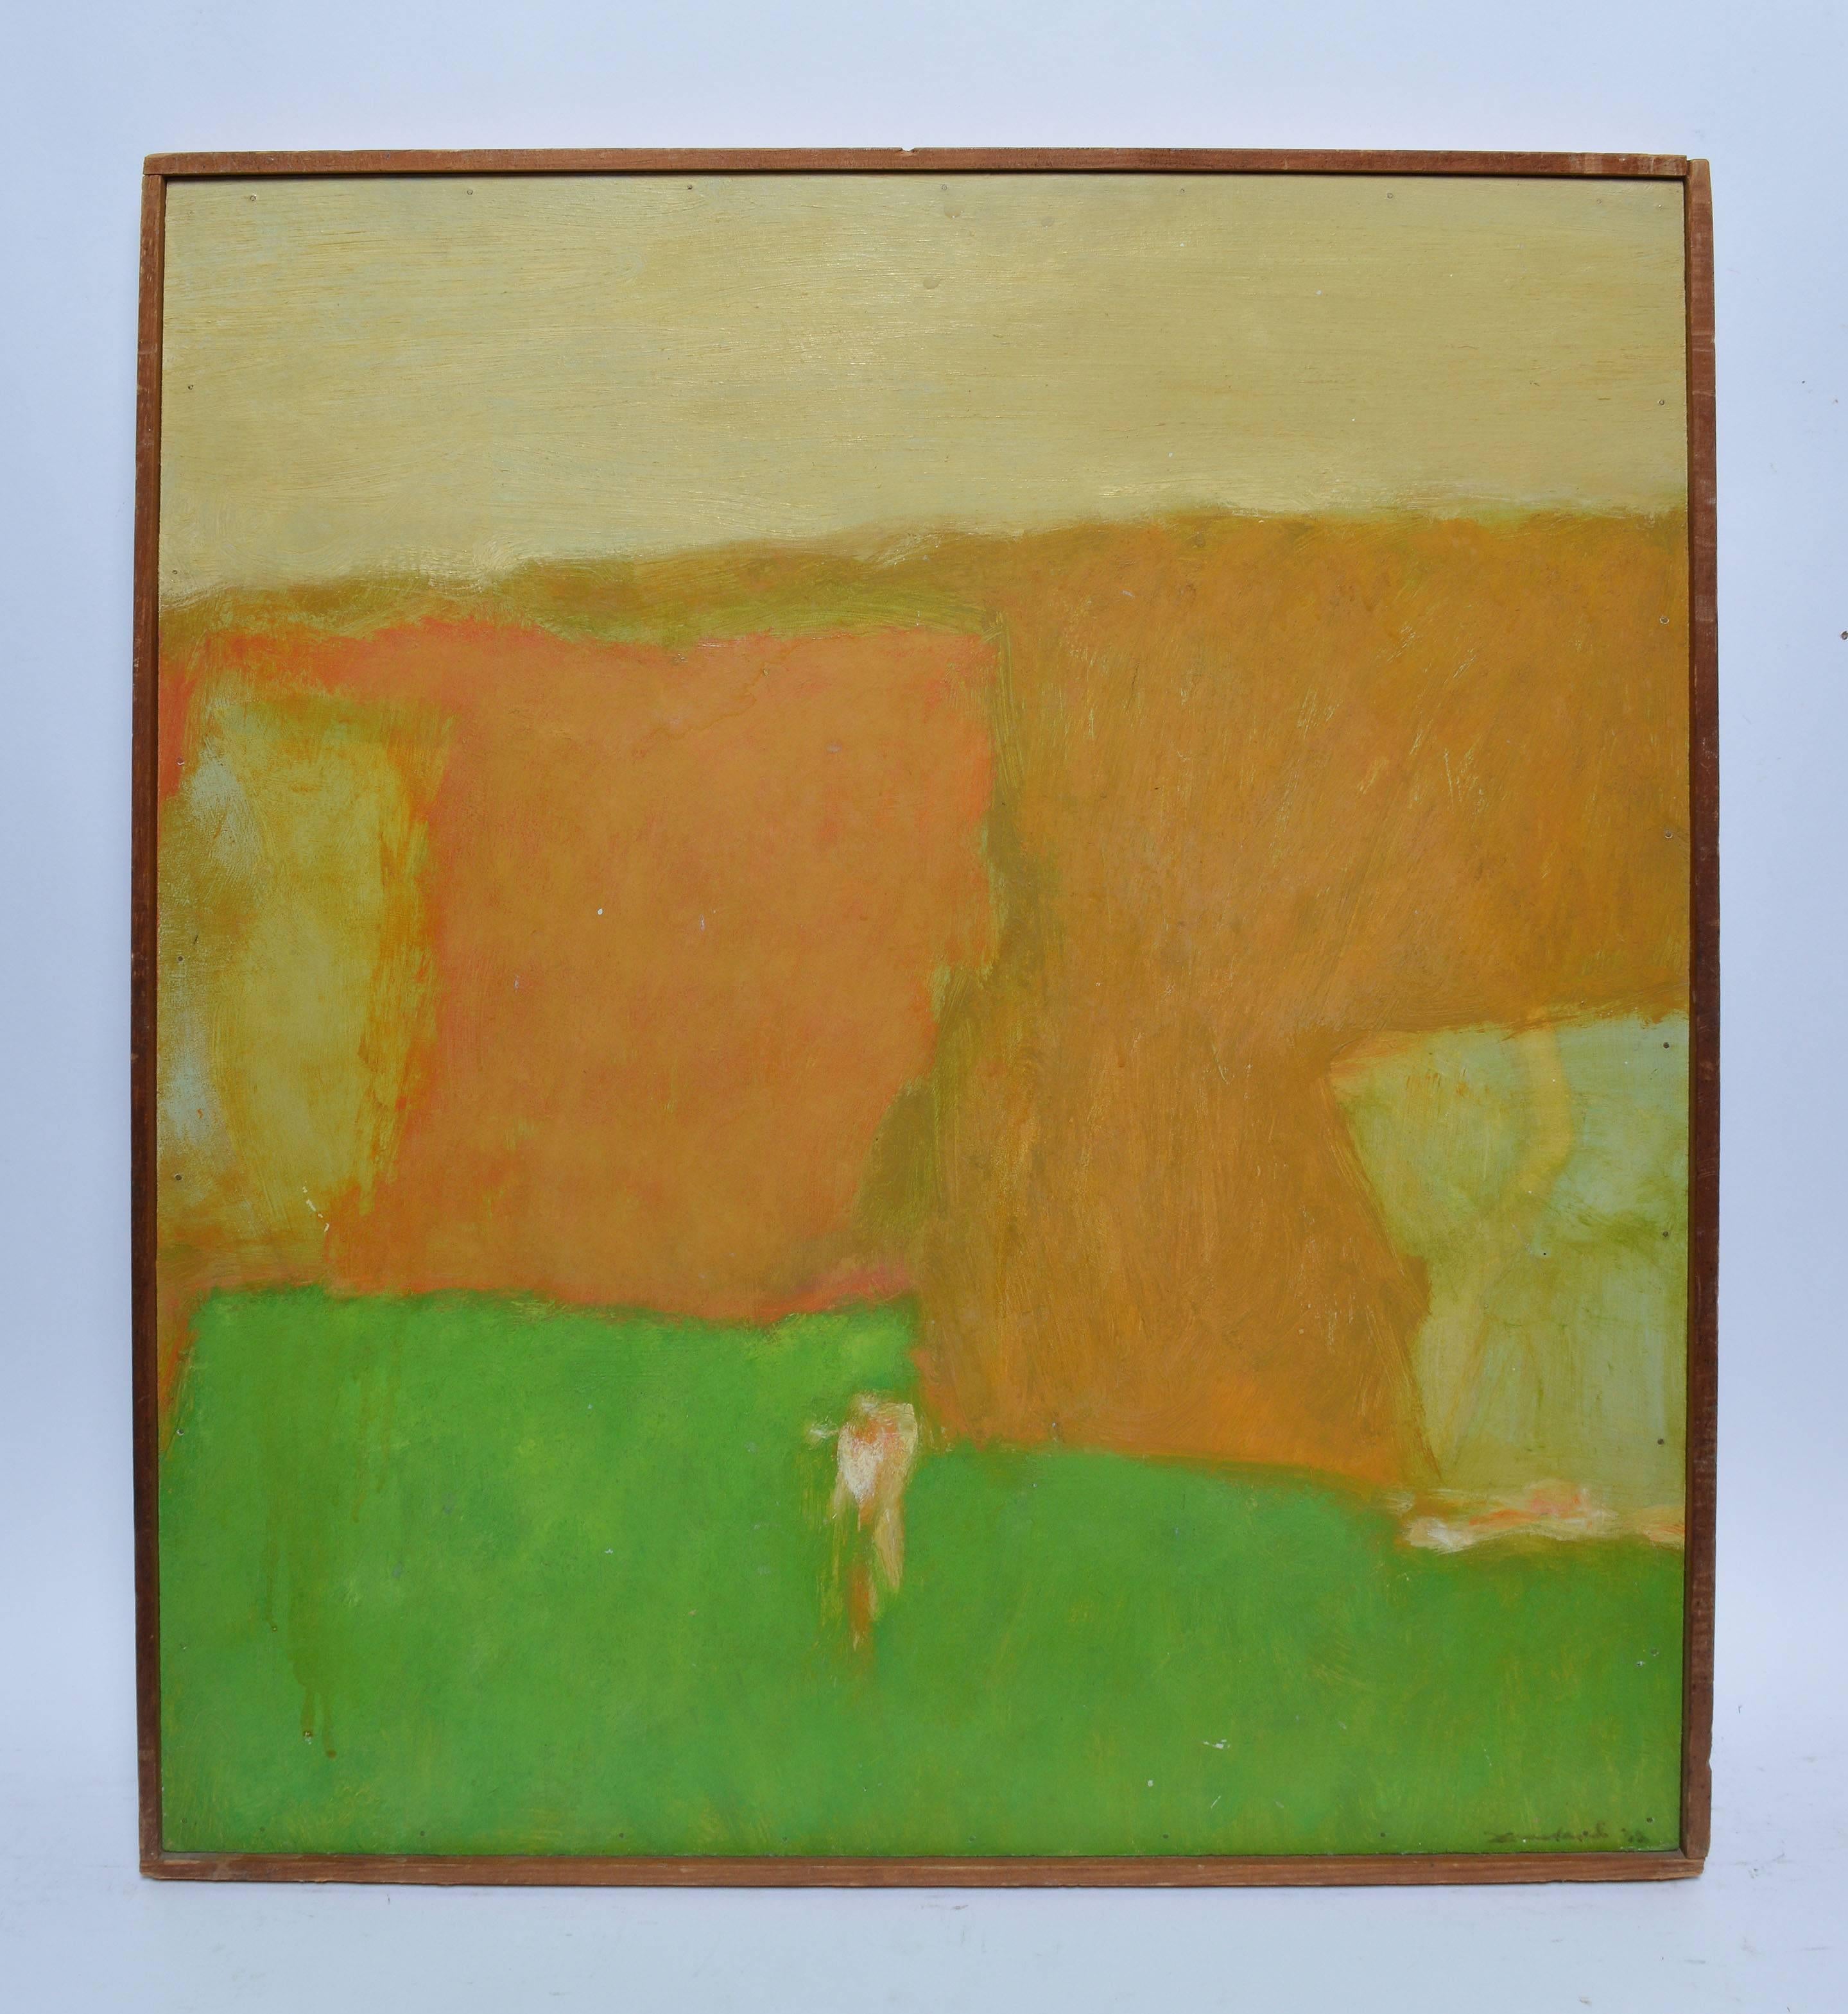 Abstract Landscape with a Figure - Painting by Unknown